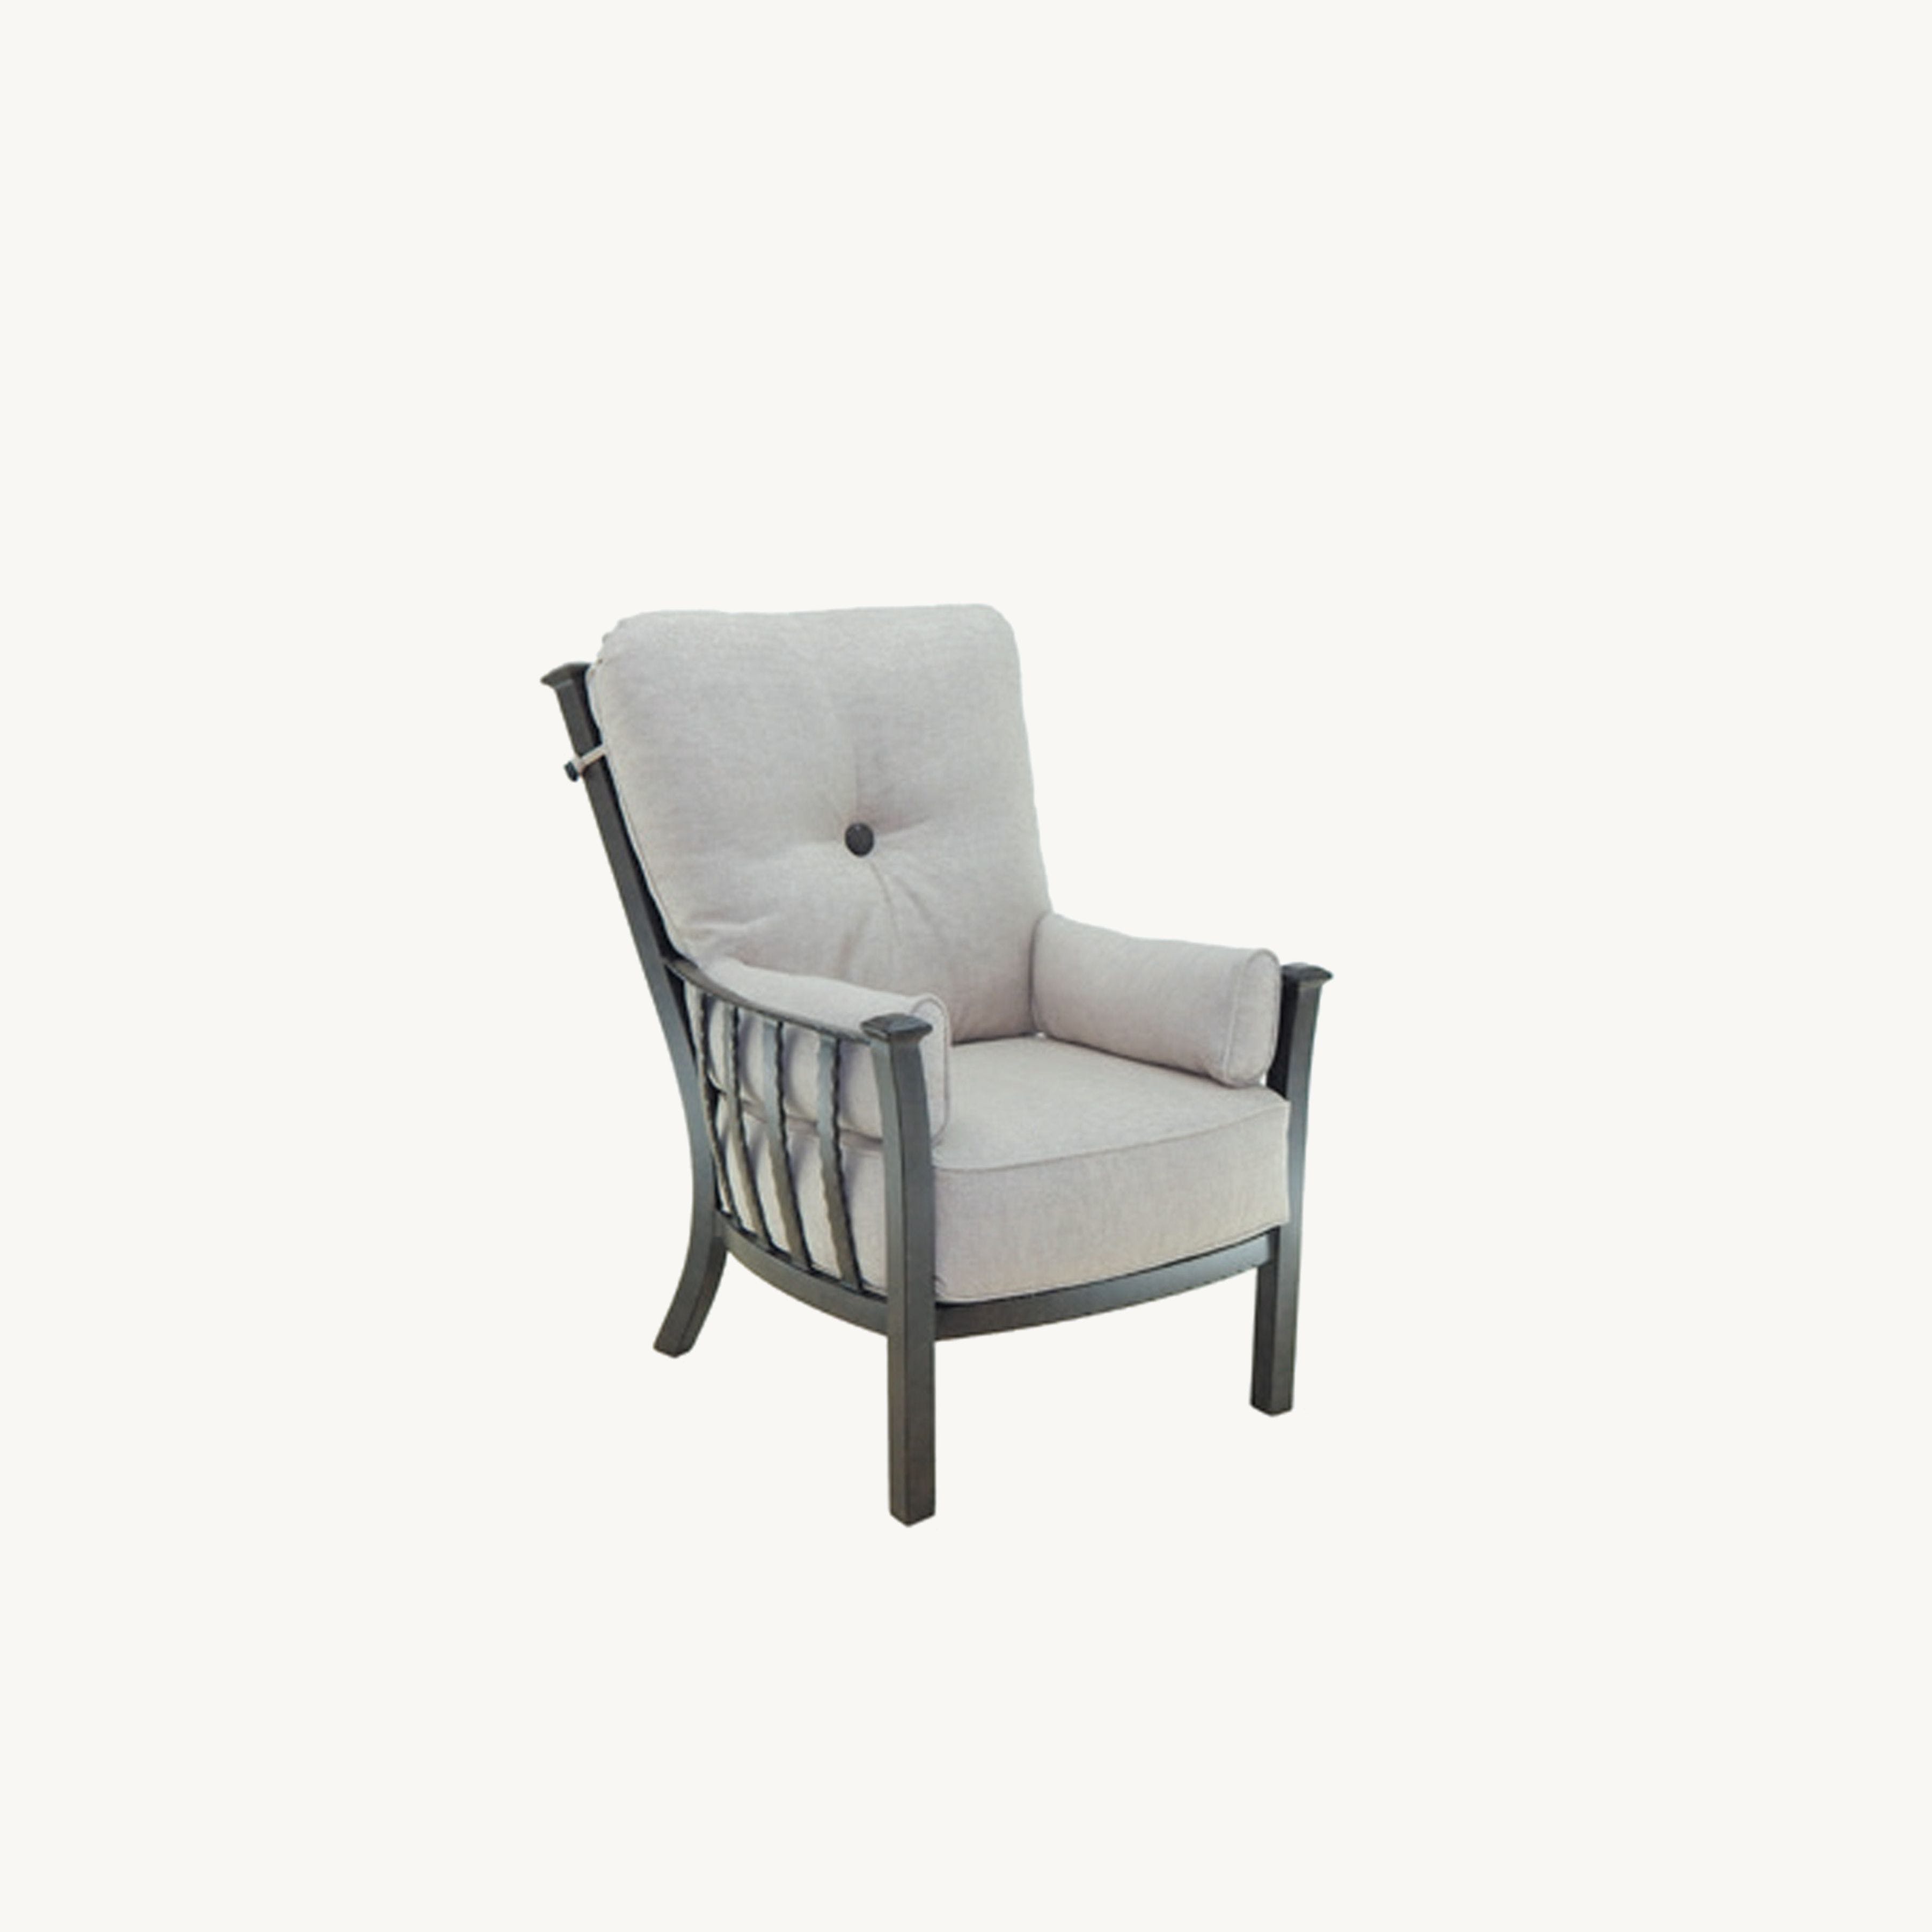 Santa Fe Ultra High Back Lounge Chair By Castelle